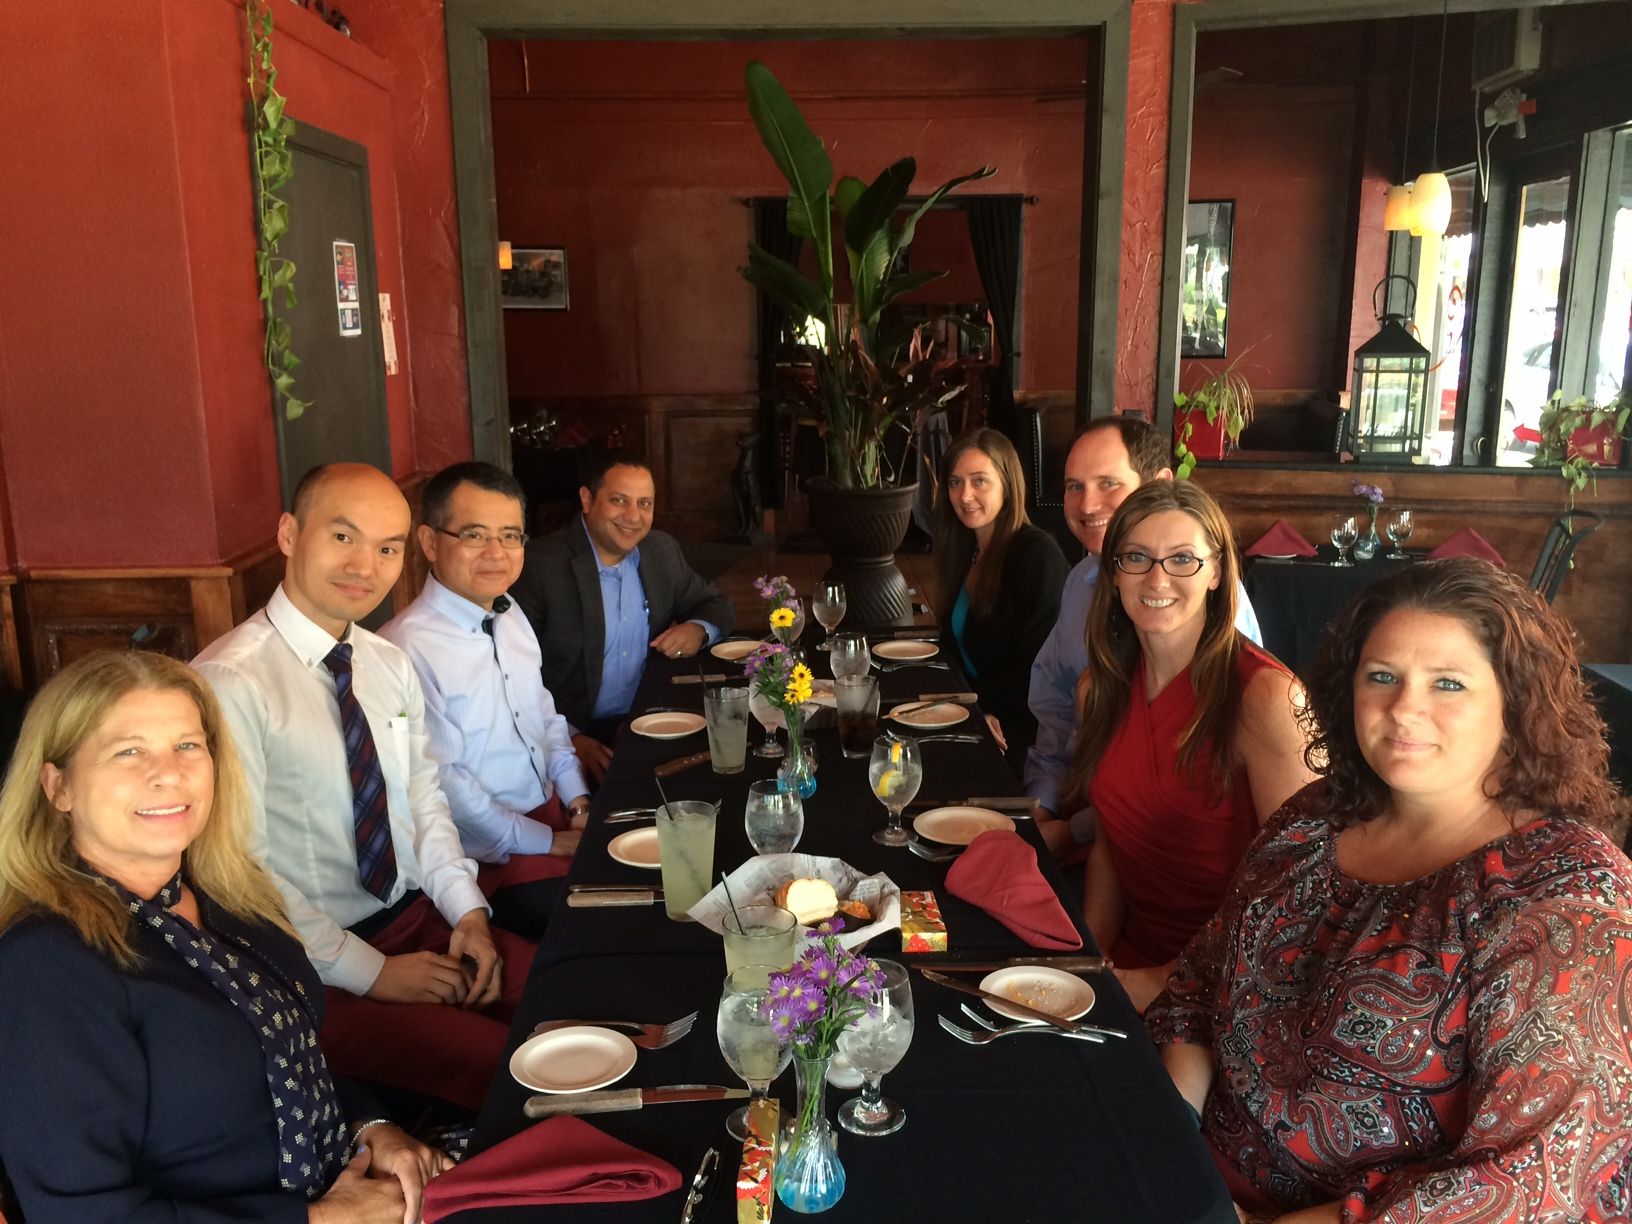  Widerman Malek Attorneys and Staff enjoy Lunch at The Firehouse Restaurant with Shiga International Japanese Patent Attorneys